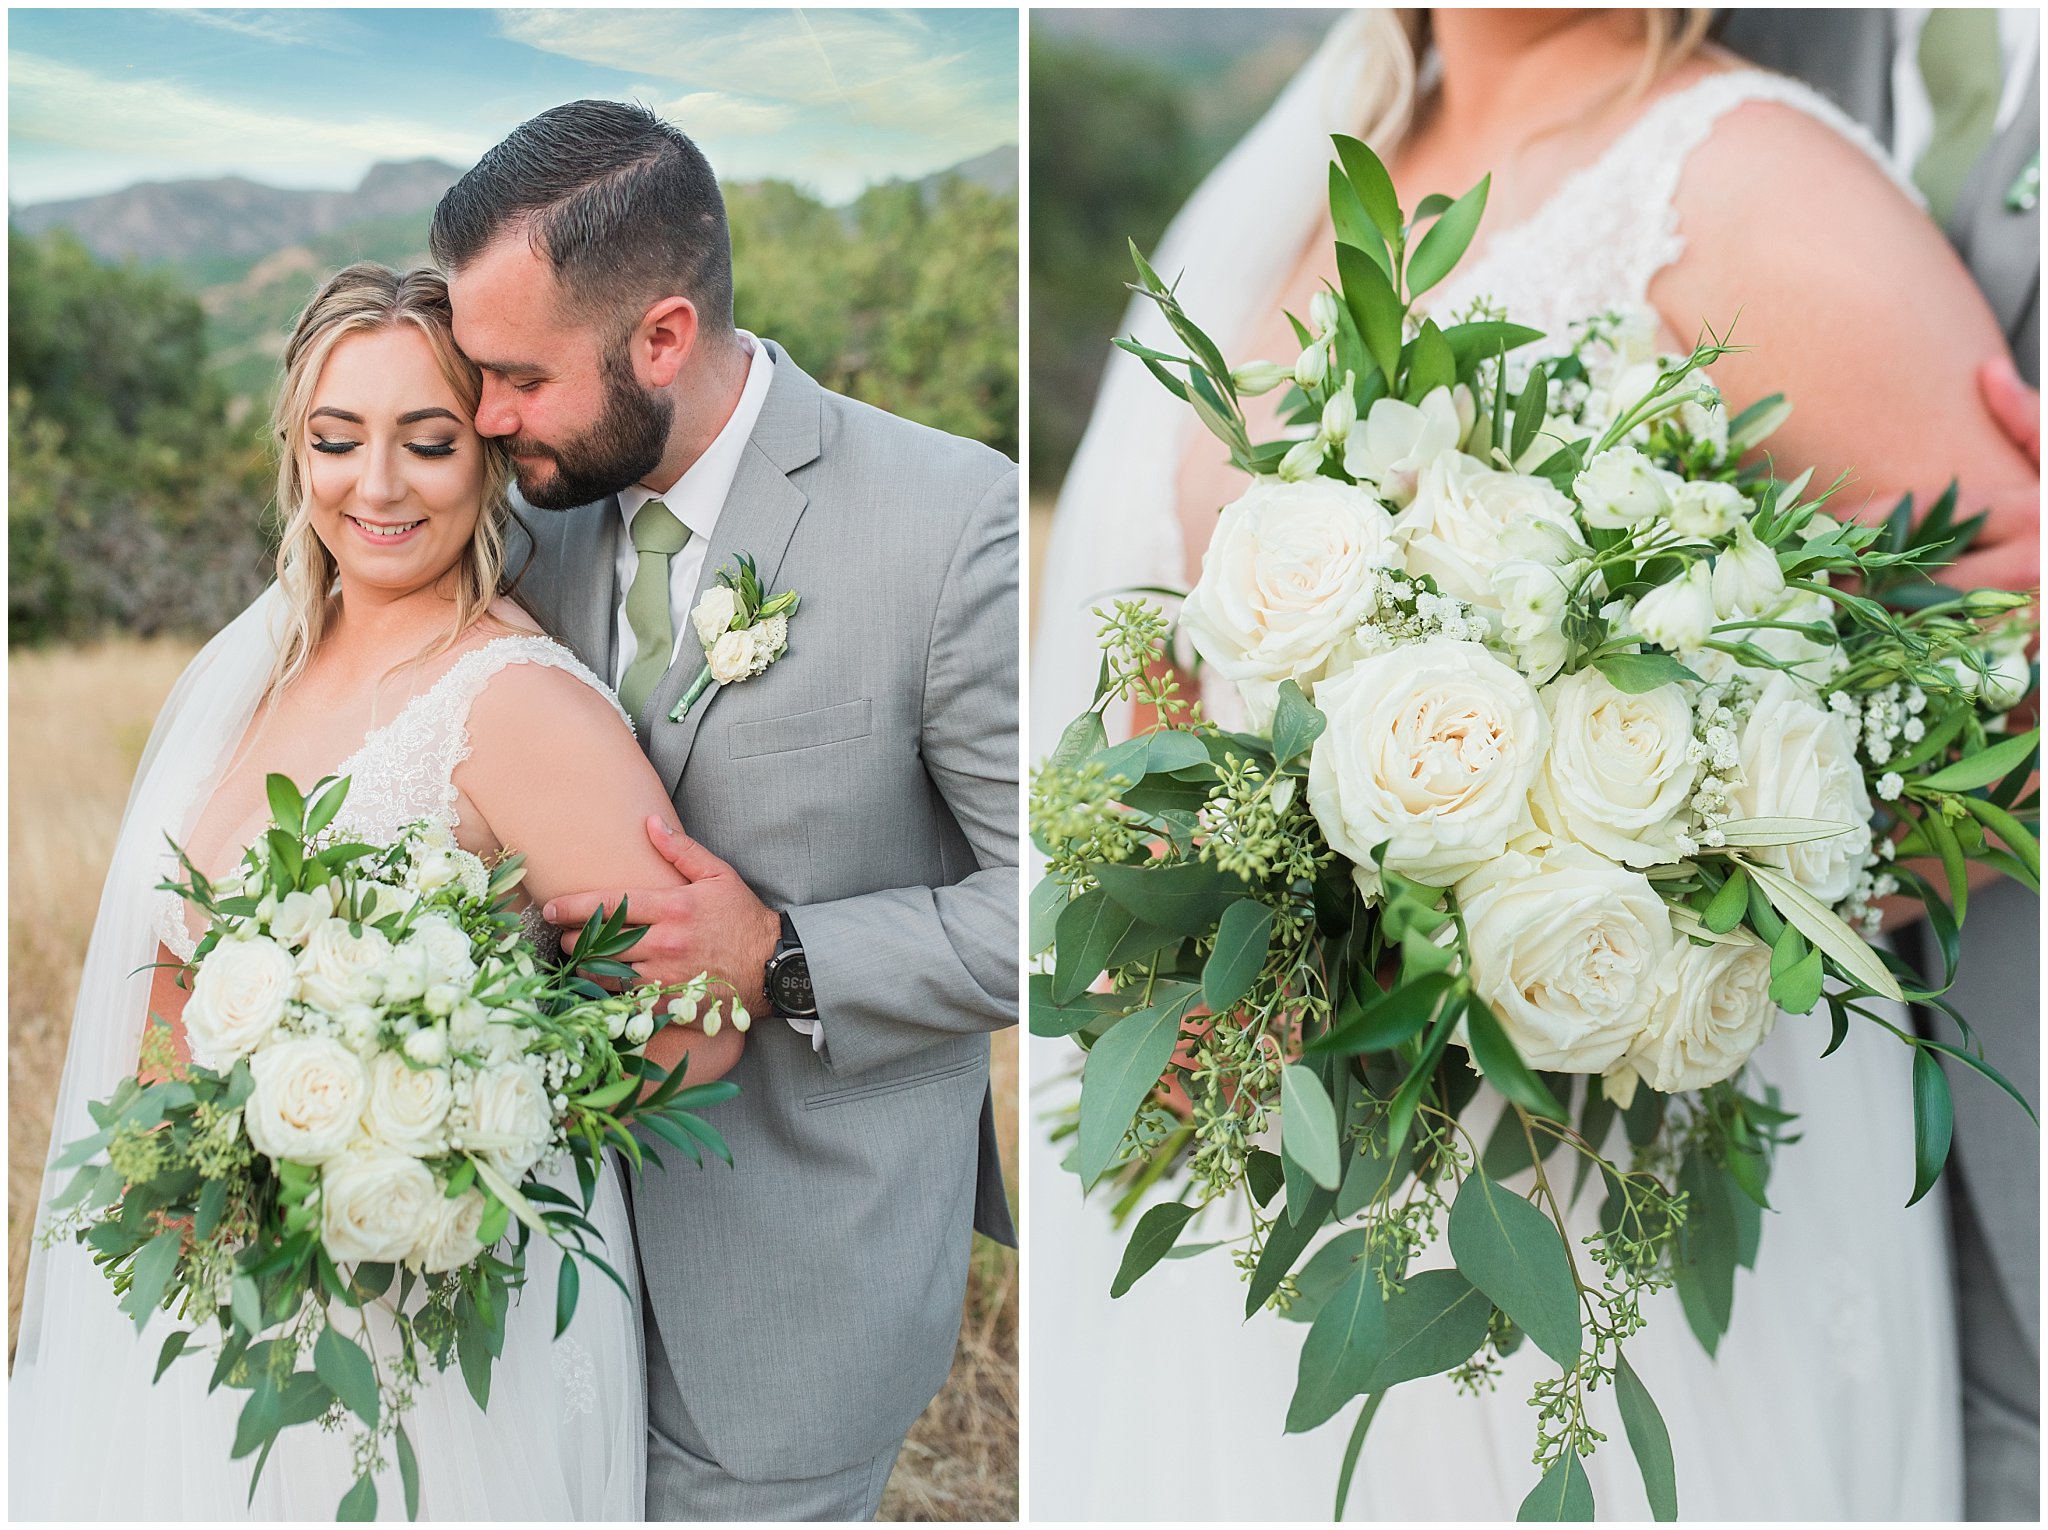 Bride and groom portraits with gray suit and champagne dress and veil and white floral bouquet in the Utah mountains | Sage Green and Gray Summer Wedding at Oak Hills | Jessie and Dallin Photography